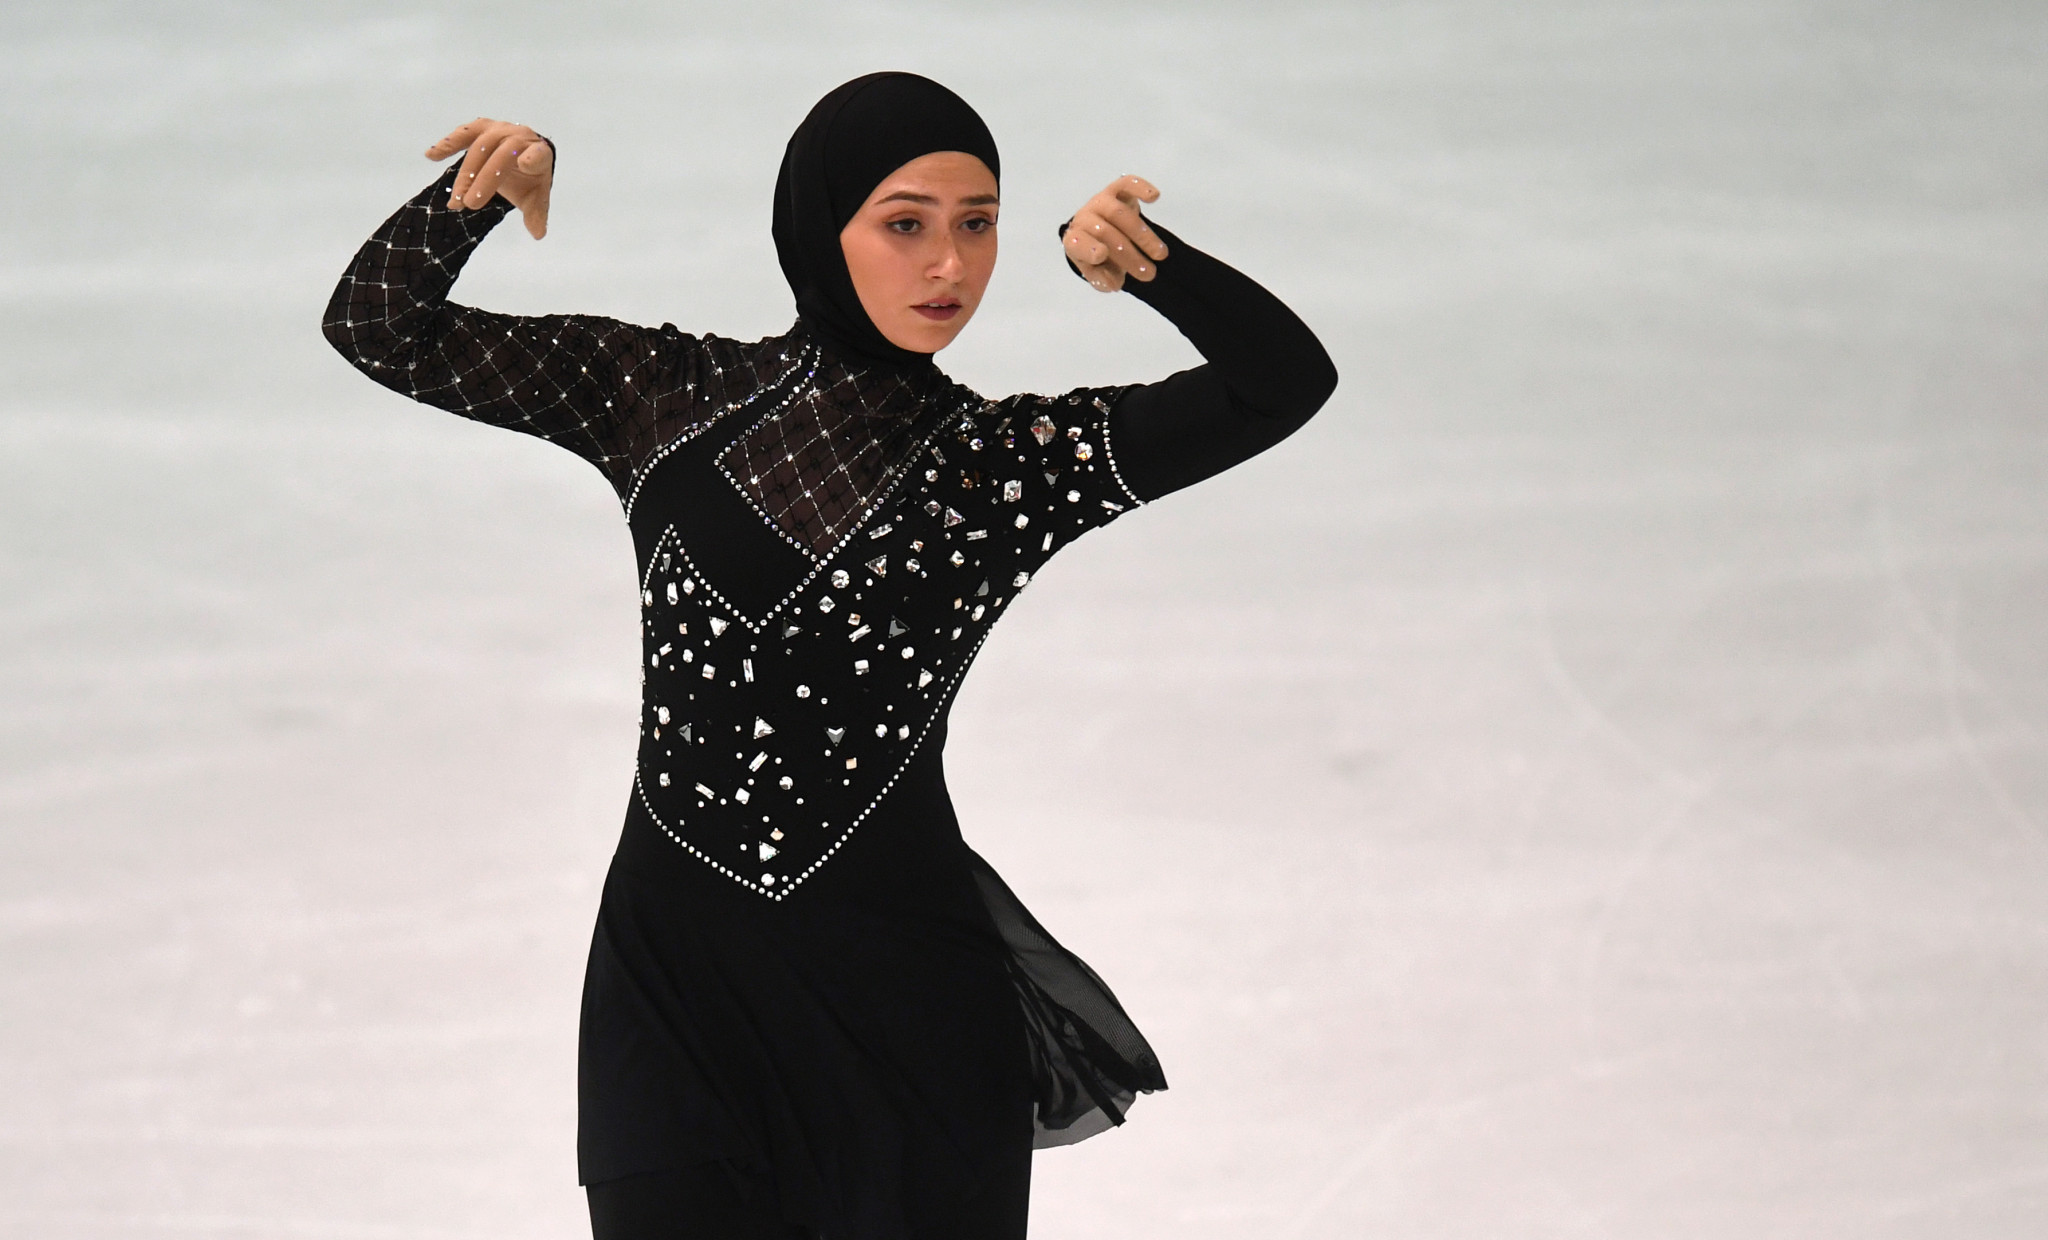 Zahra Lari became the first figure skater to compete in a headscarf in 2012 and was deducted a point for doing so ©Getty Images